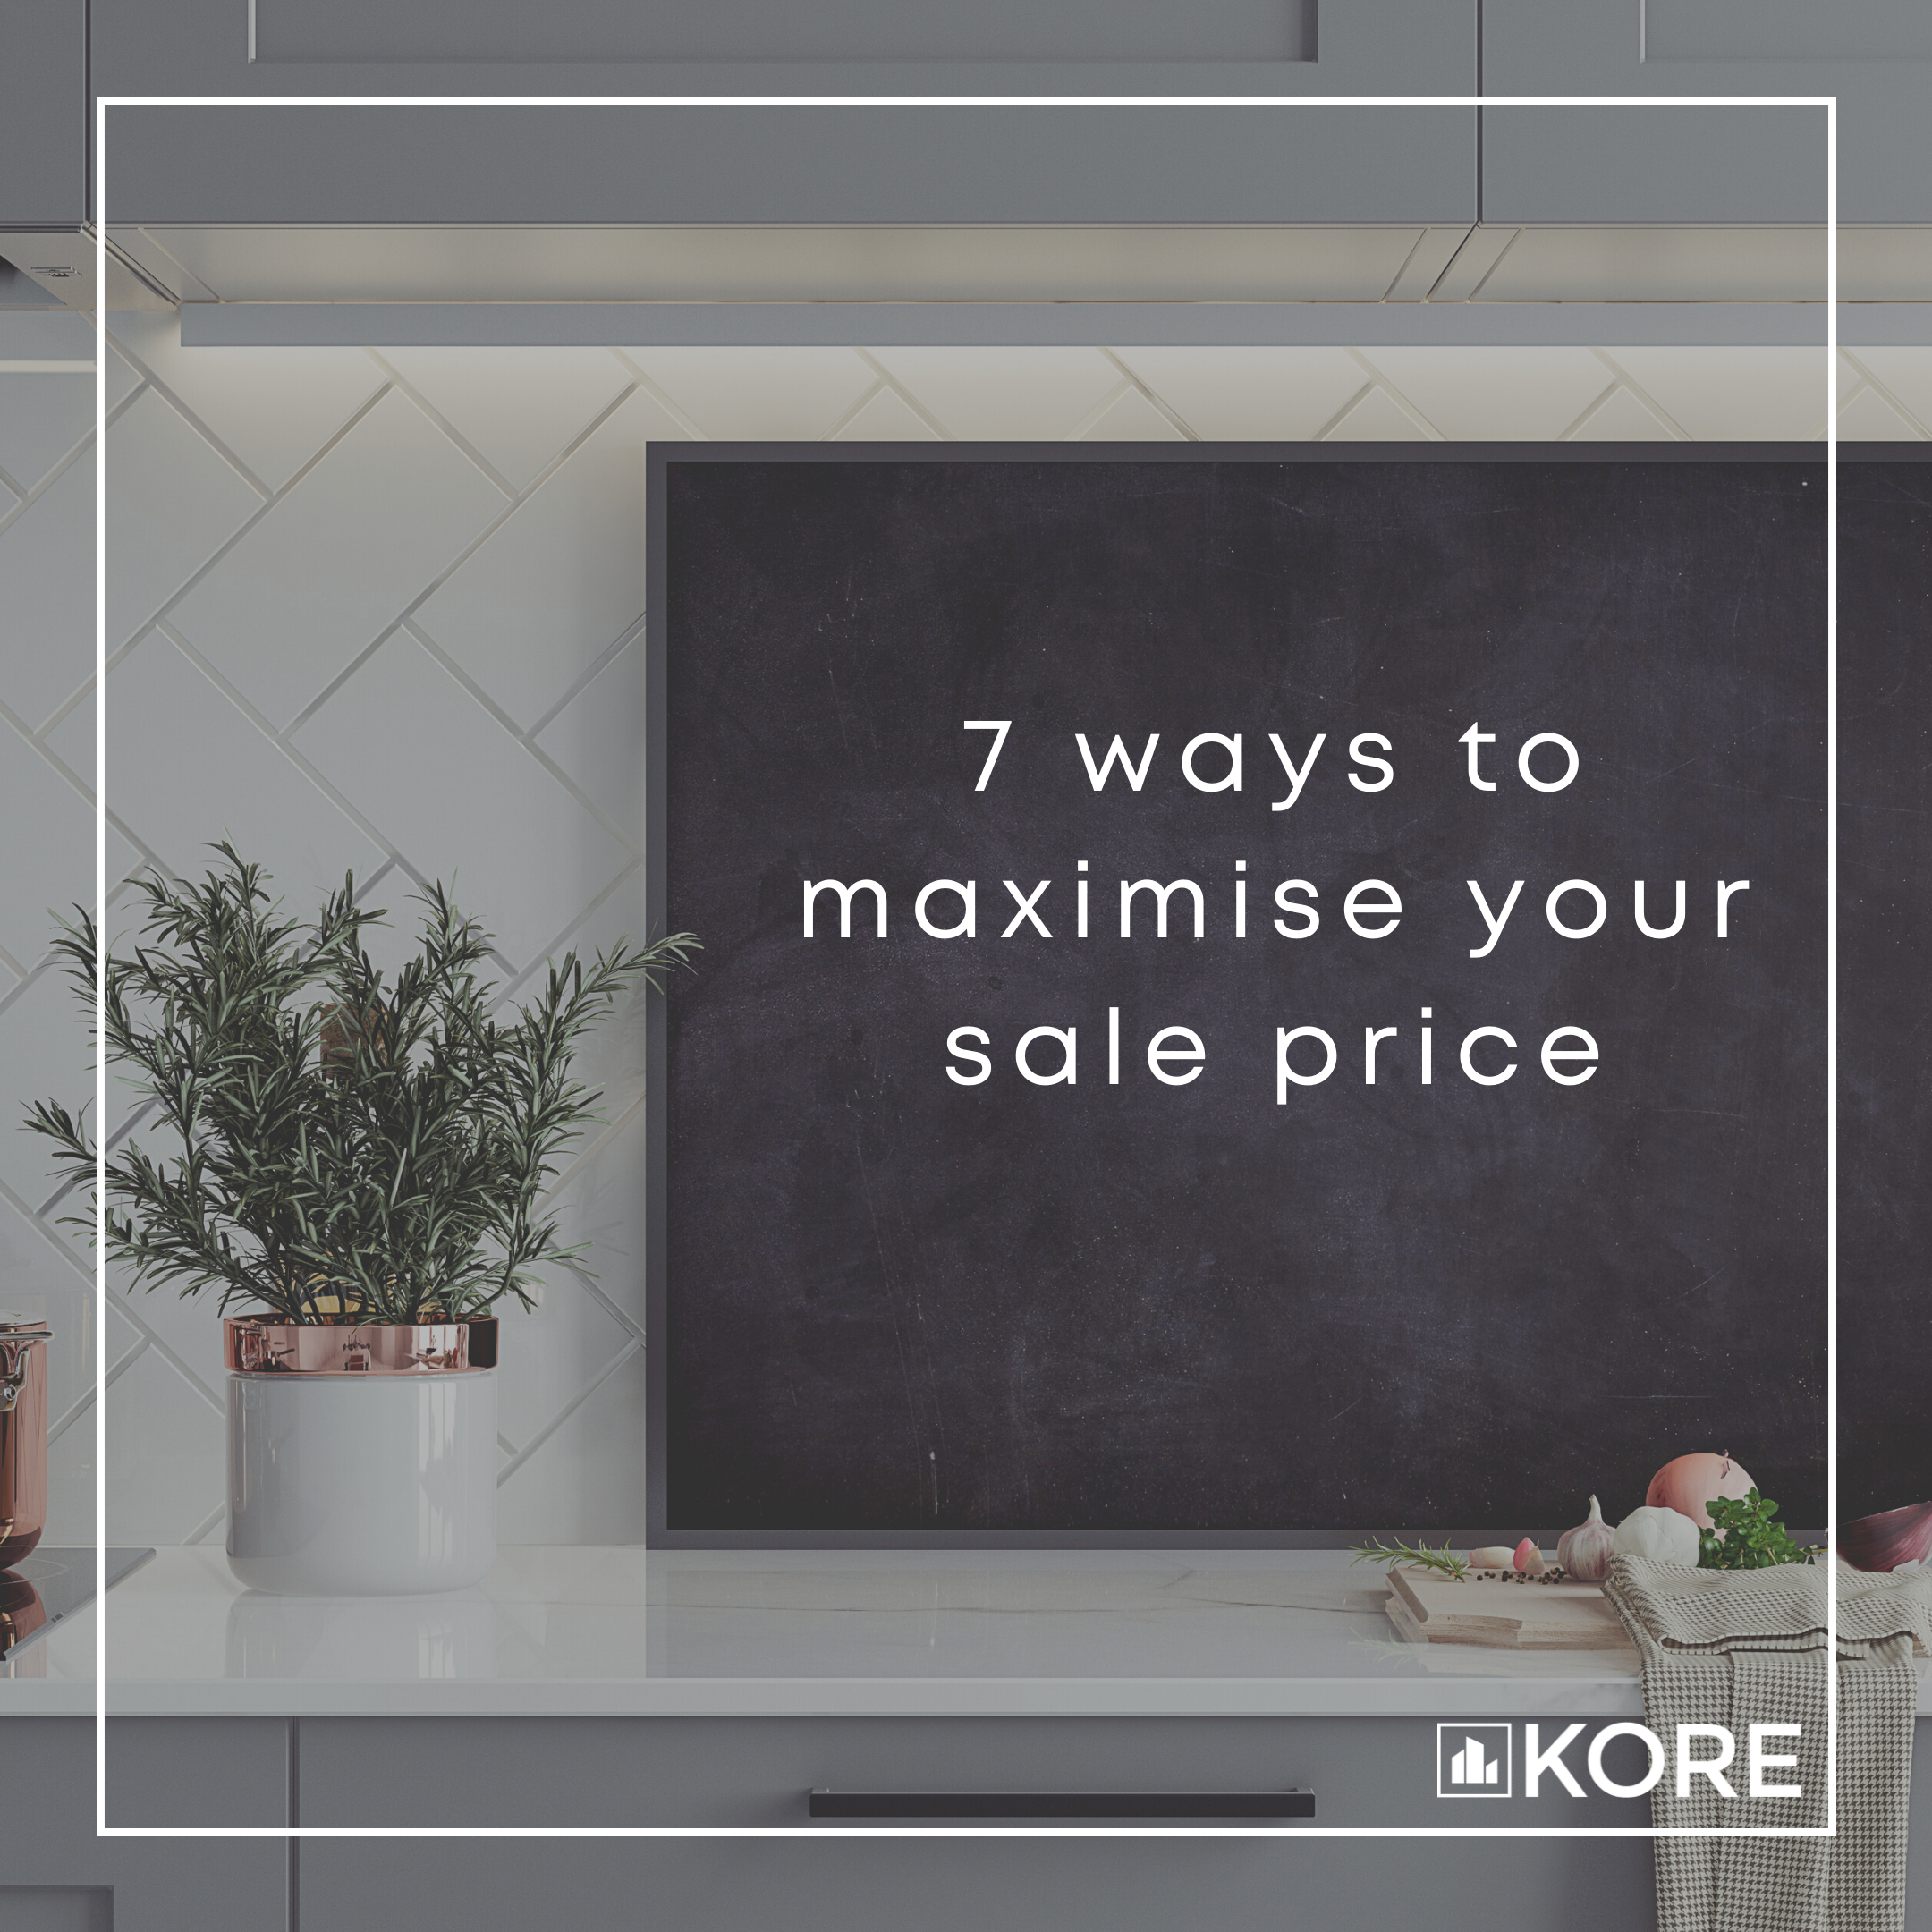 How to maximise your sale price